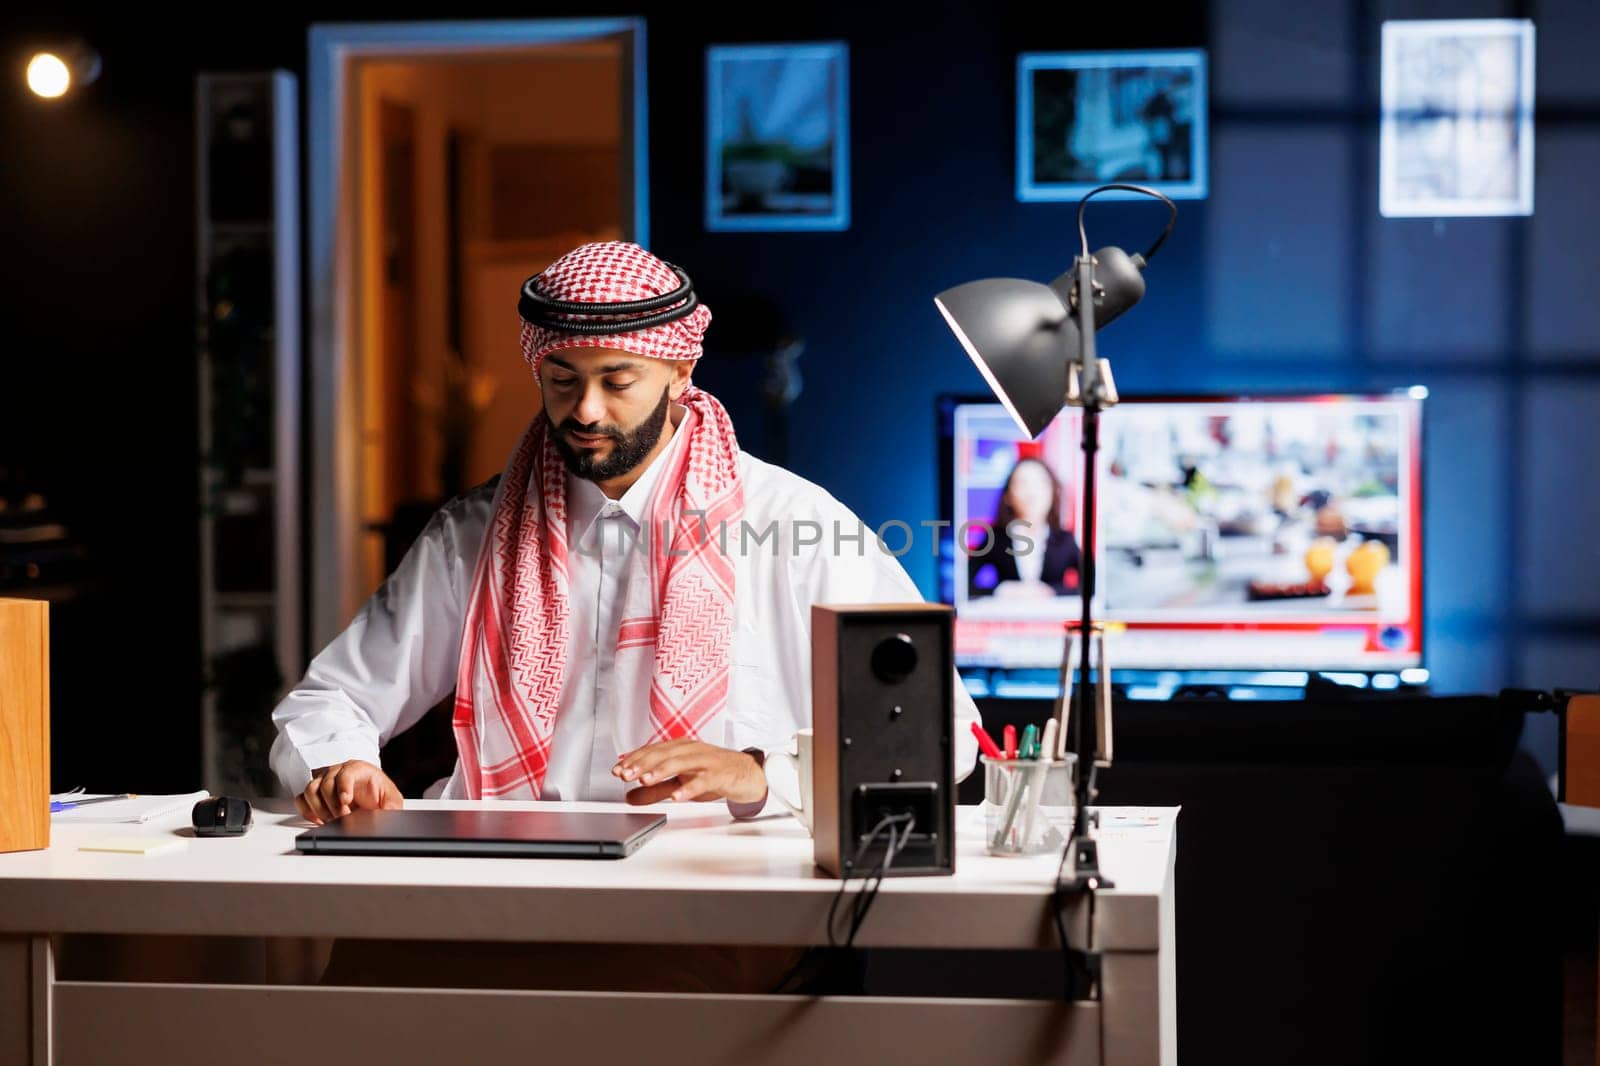 Middle Eastern man in Arabic clothing sitting at the table with his digital laptop preparing for work. Dedicated Muslim man is about to open his wireless computer for browsing the internet.